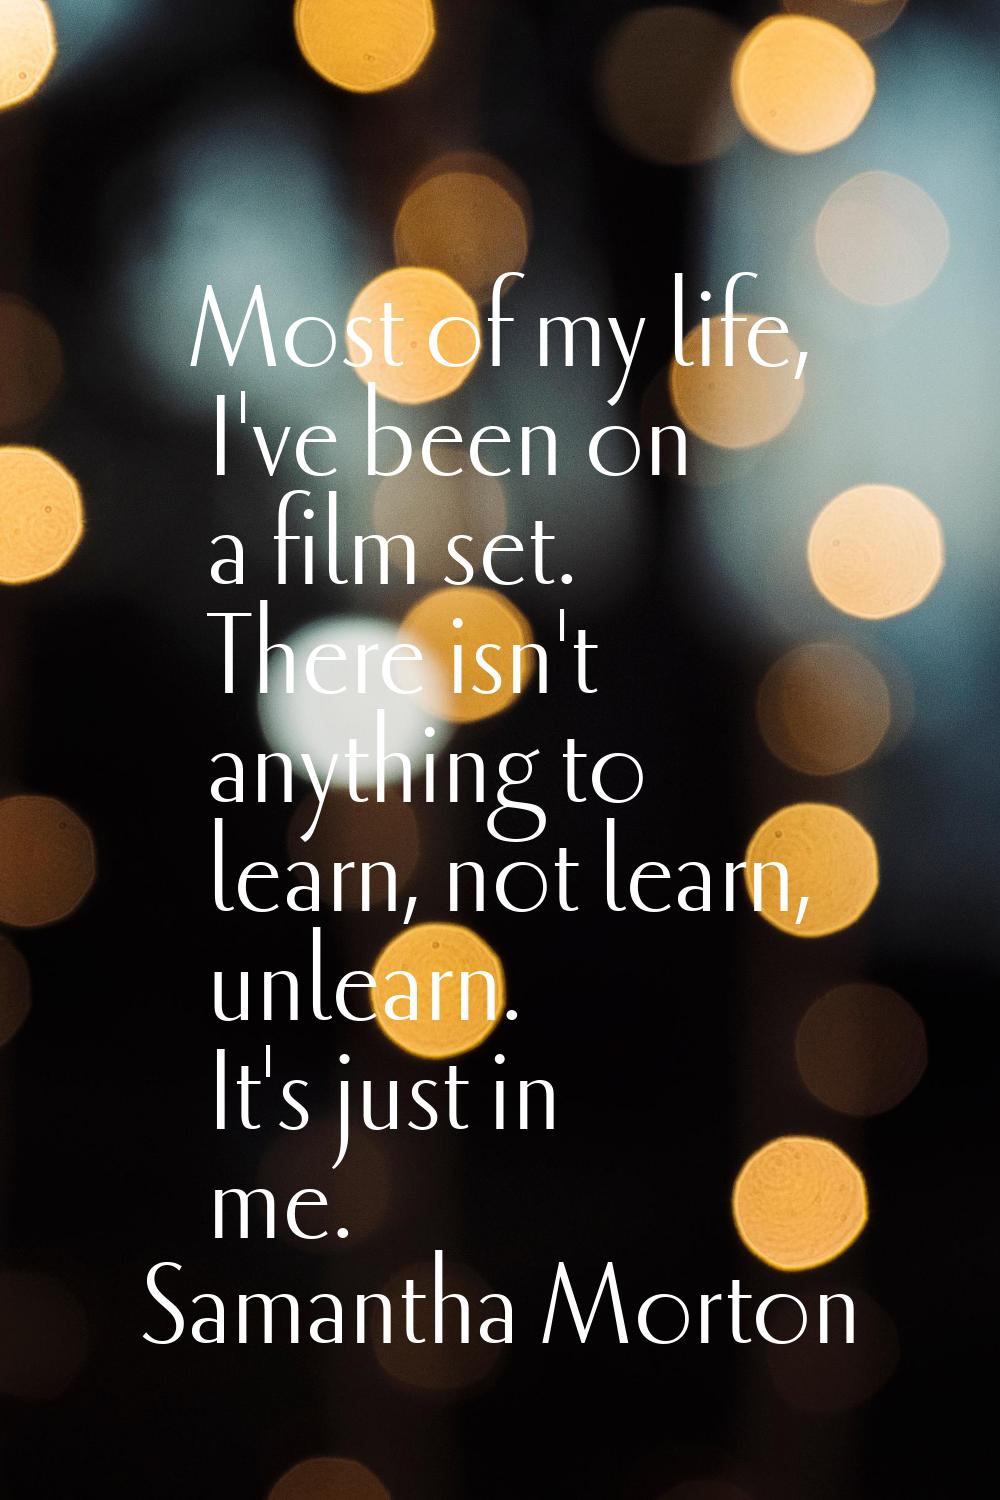 Most of my life, I've been on a film set. There isn't anything to learn, not learn, unlearn. It's j